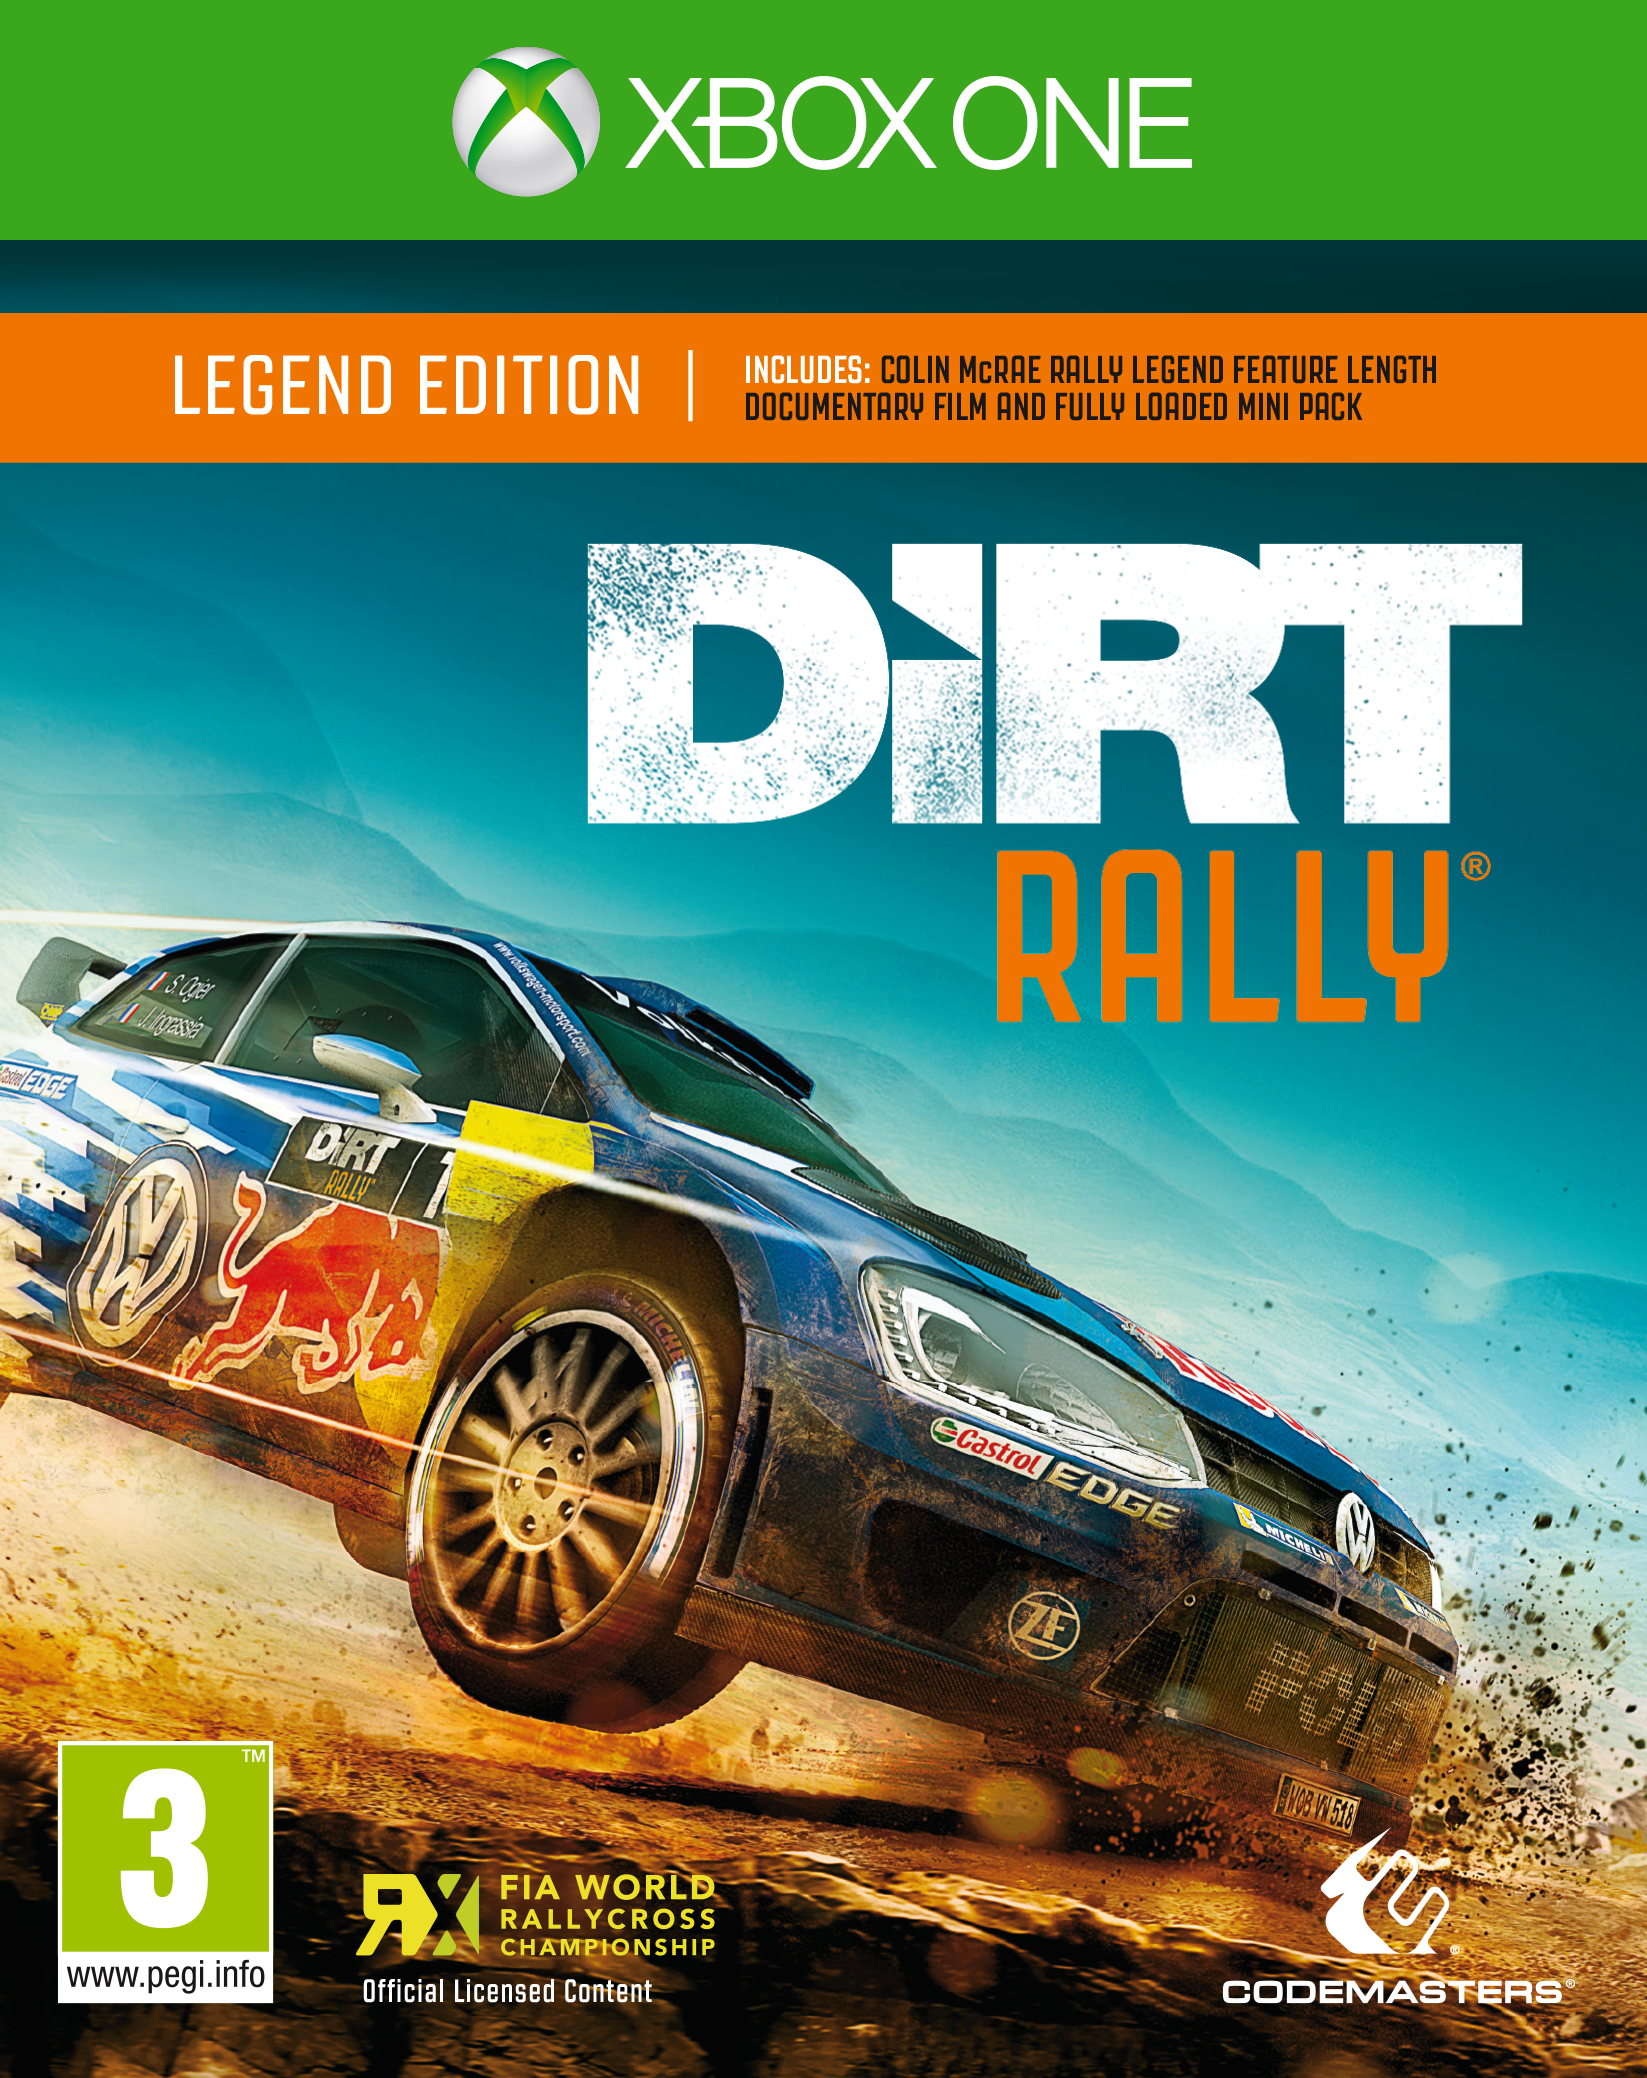 revive dirt rally